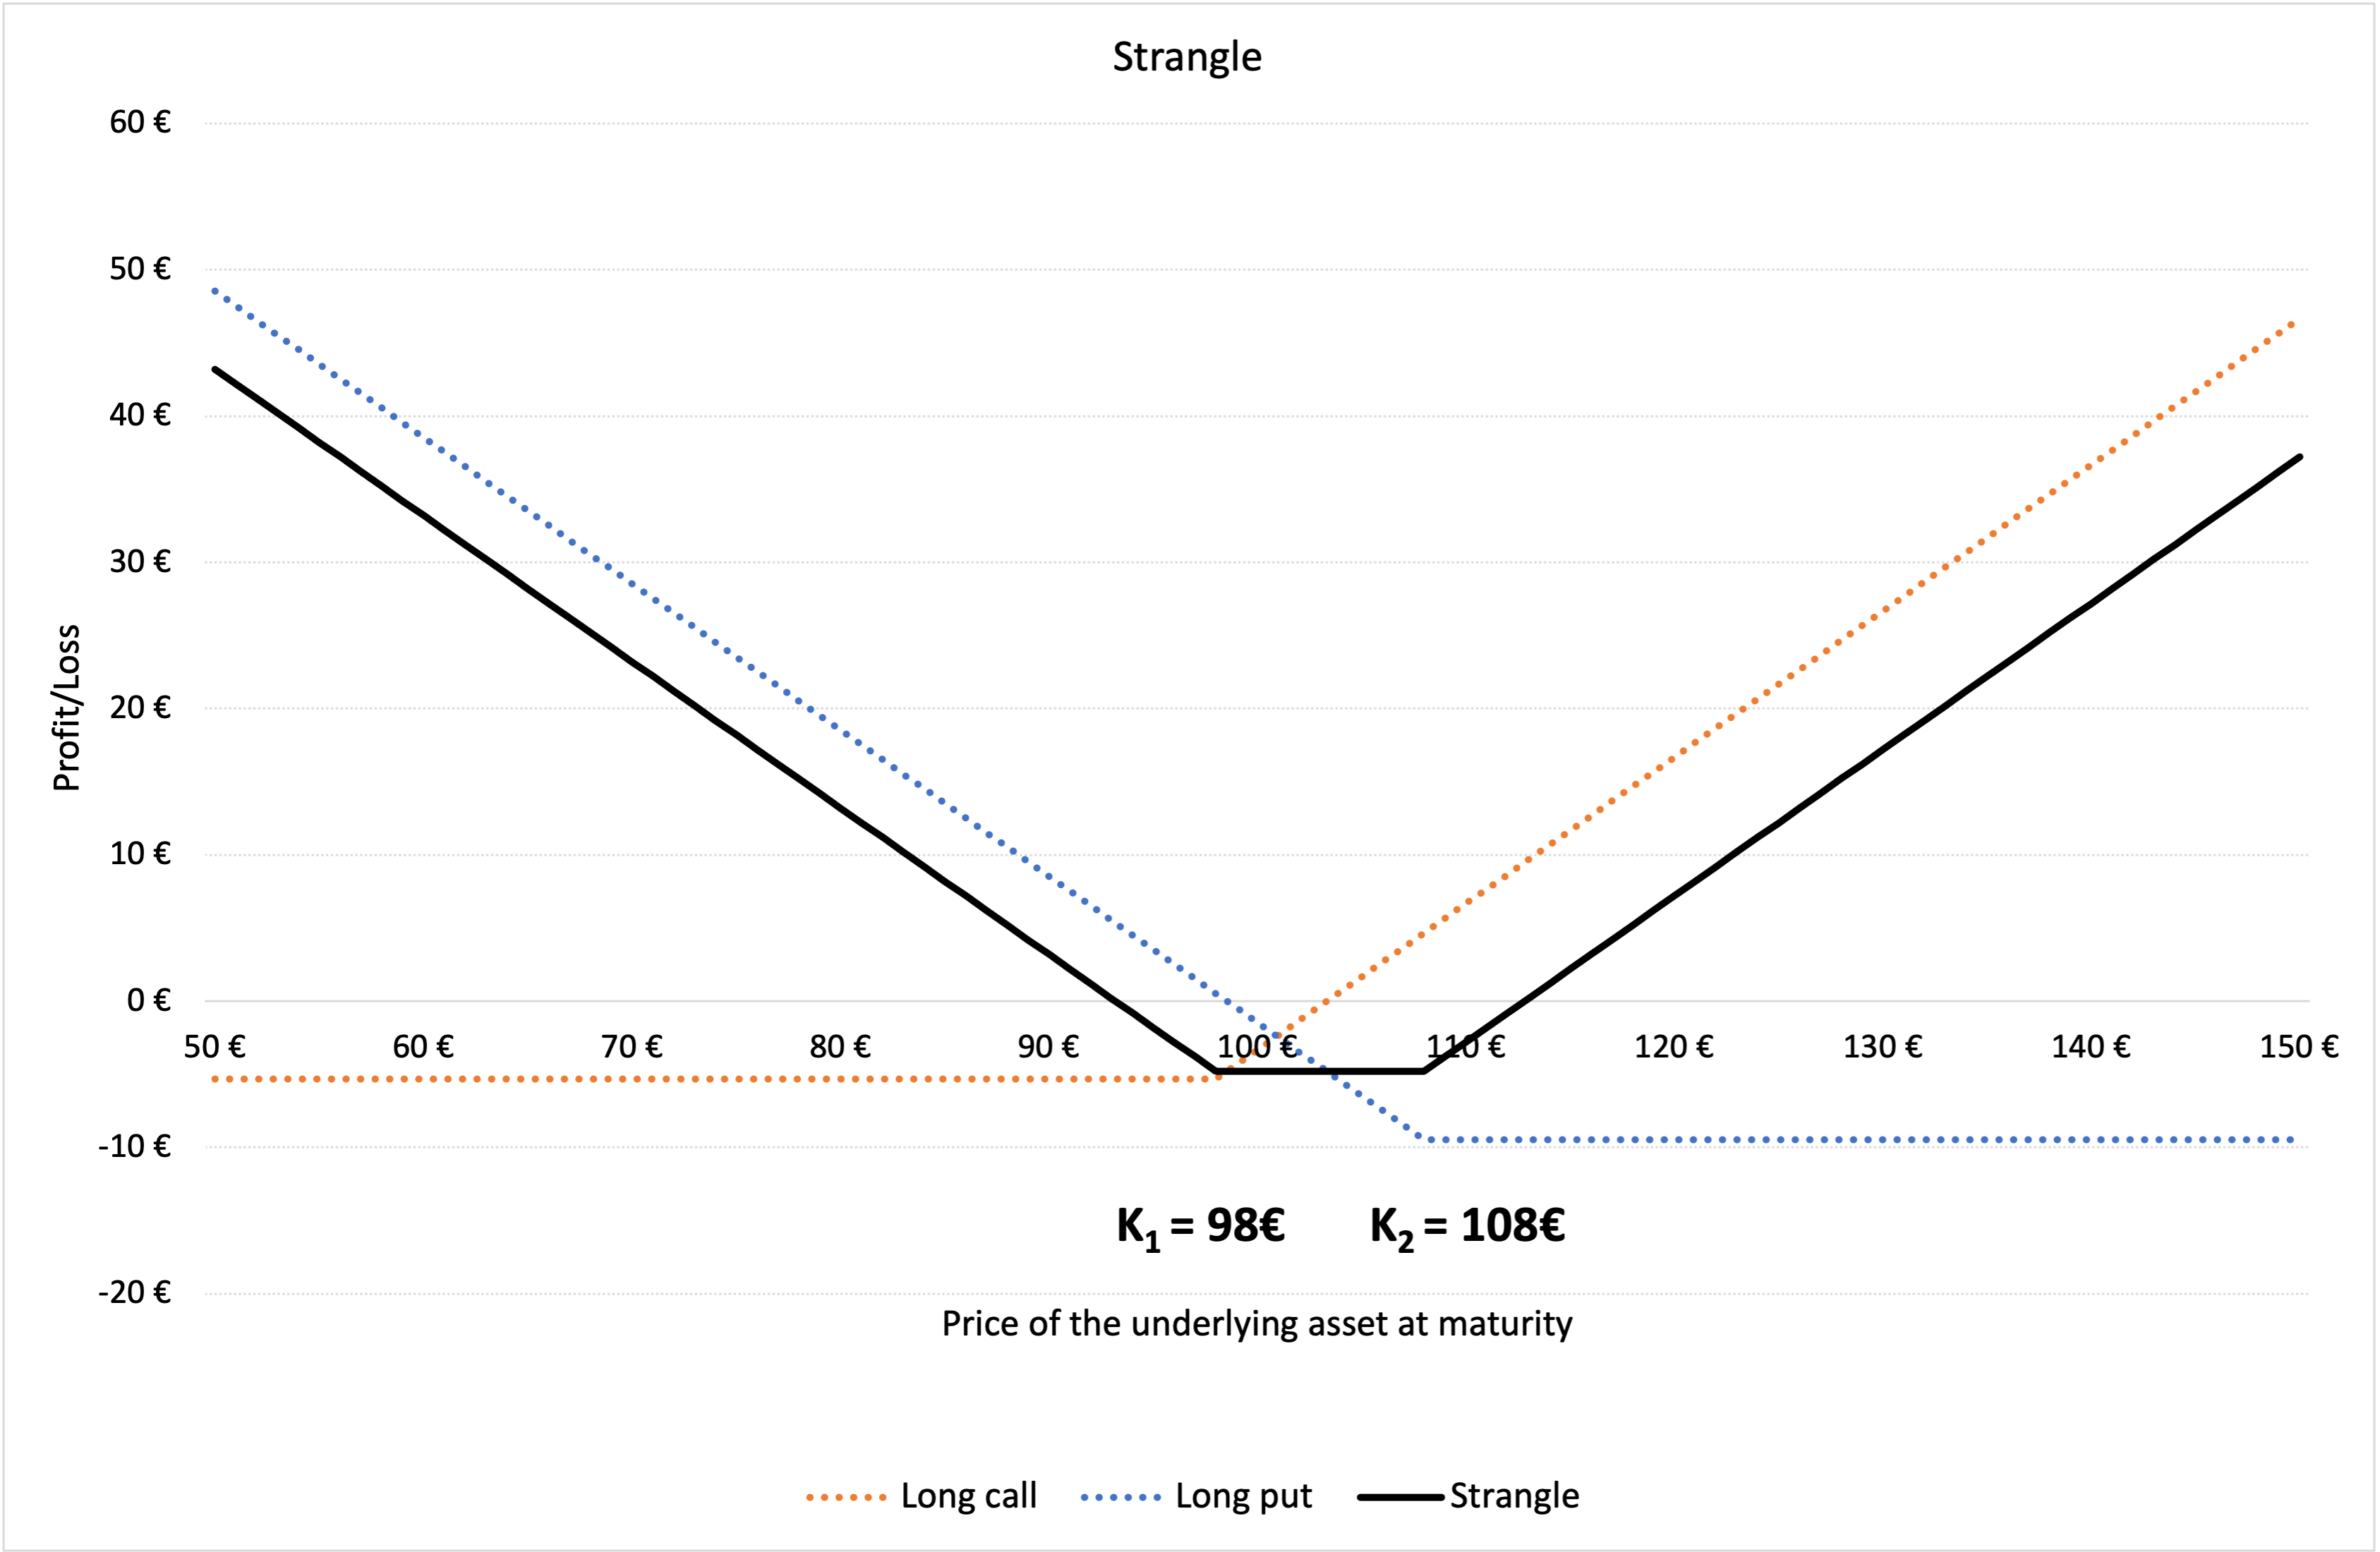  Profit and loss (P&L) function of a Strangle